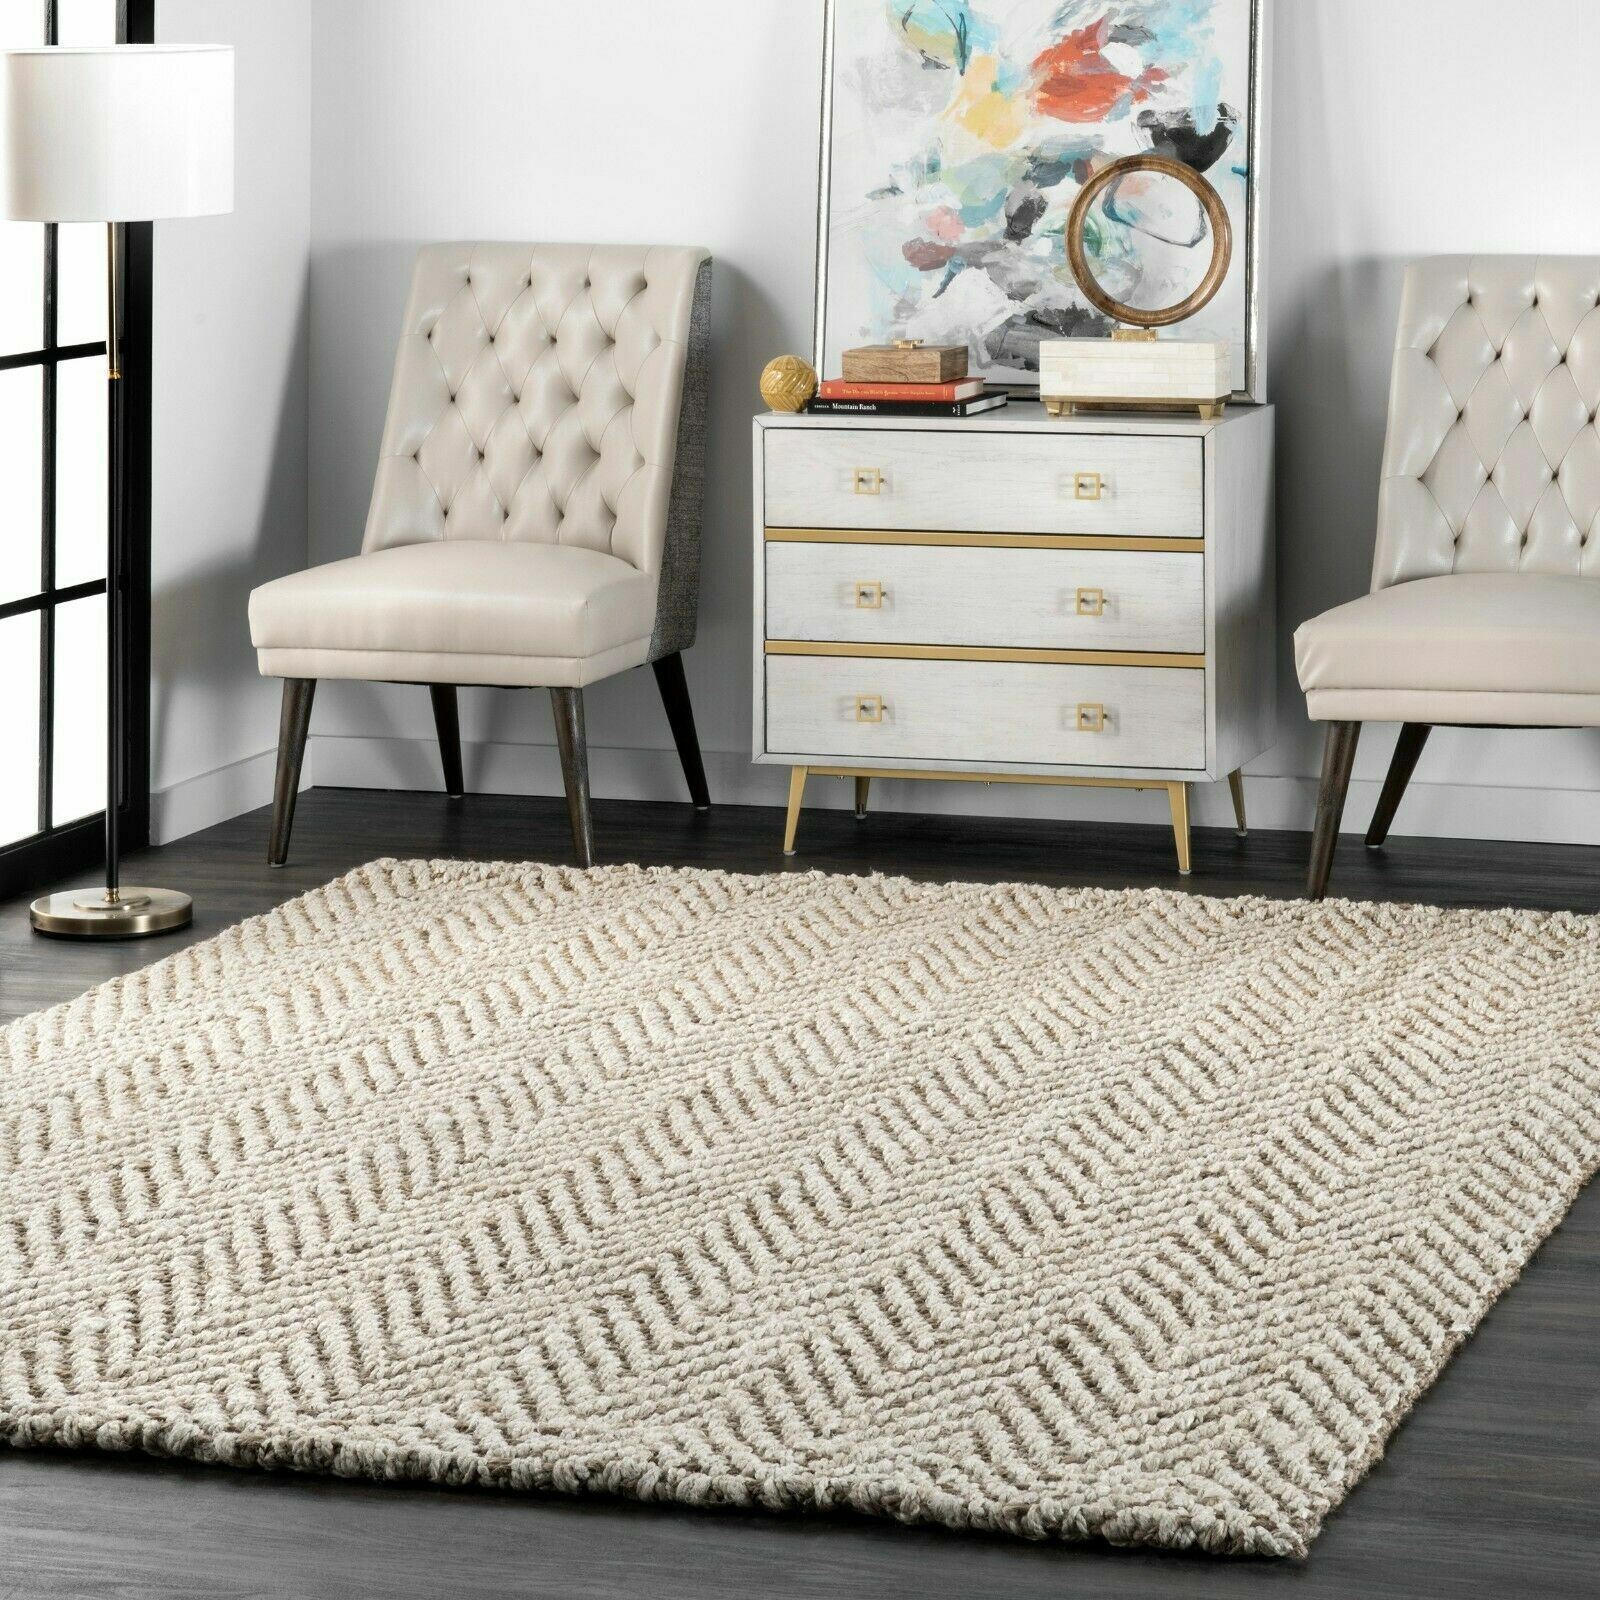 nuLOOM Hand Made Modern Chevron Natural Jute Area Rug in Tan and Ivory